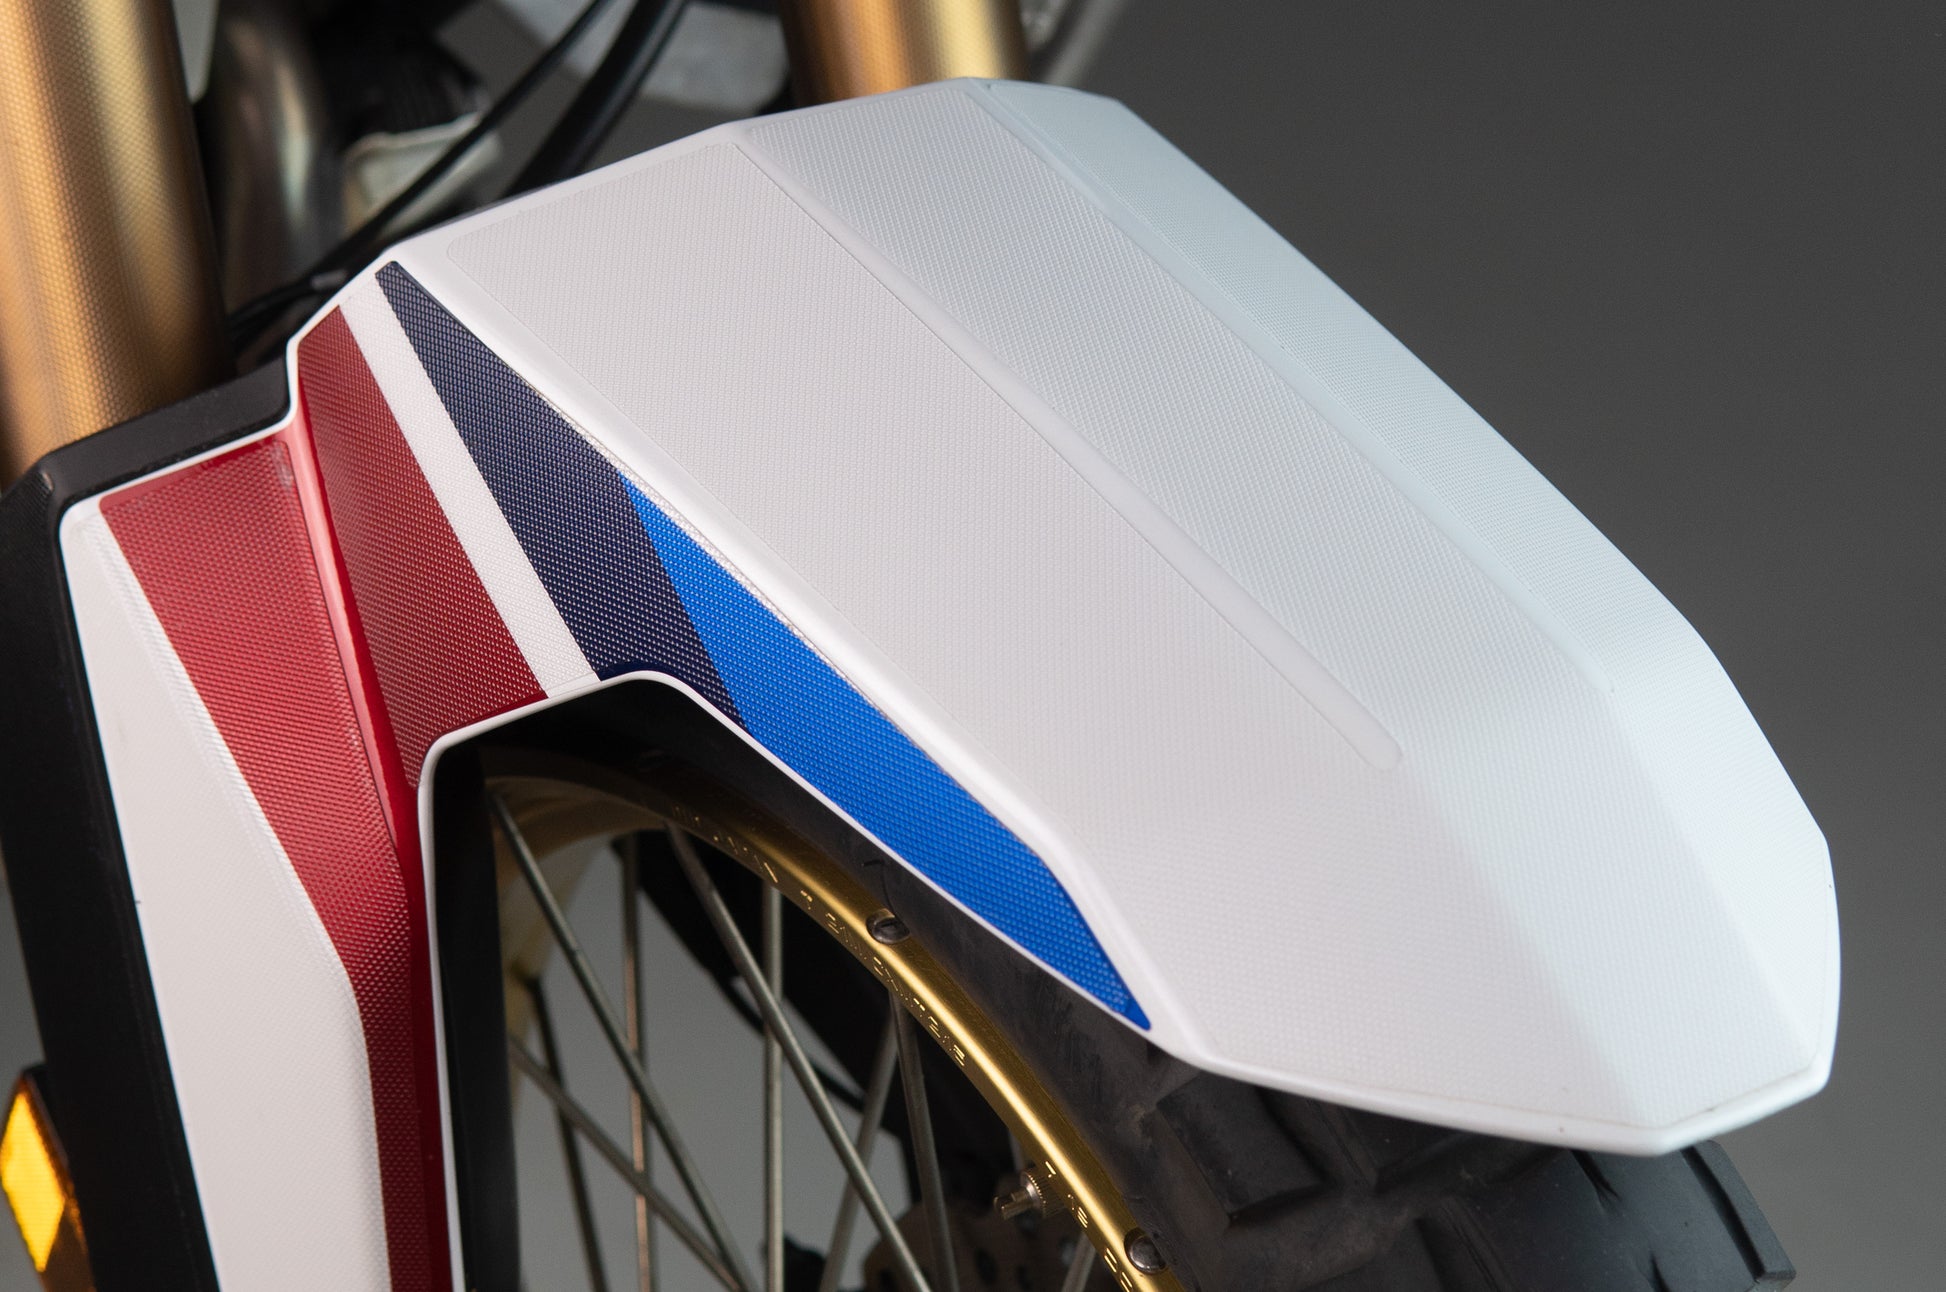 Off Road Scratch Saver for Honda Africa Twin 2020-21. Front Kit - Uniracing #honda #africatwin #hondaafricatwin #crf1000l #crf1100 #africatwinadventuresports #crf1100africatwin #uniracing #stickersforyouradventure